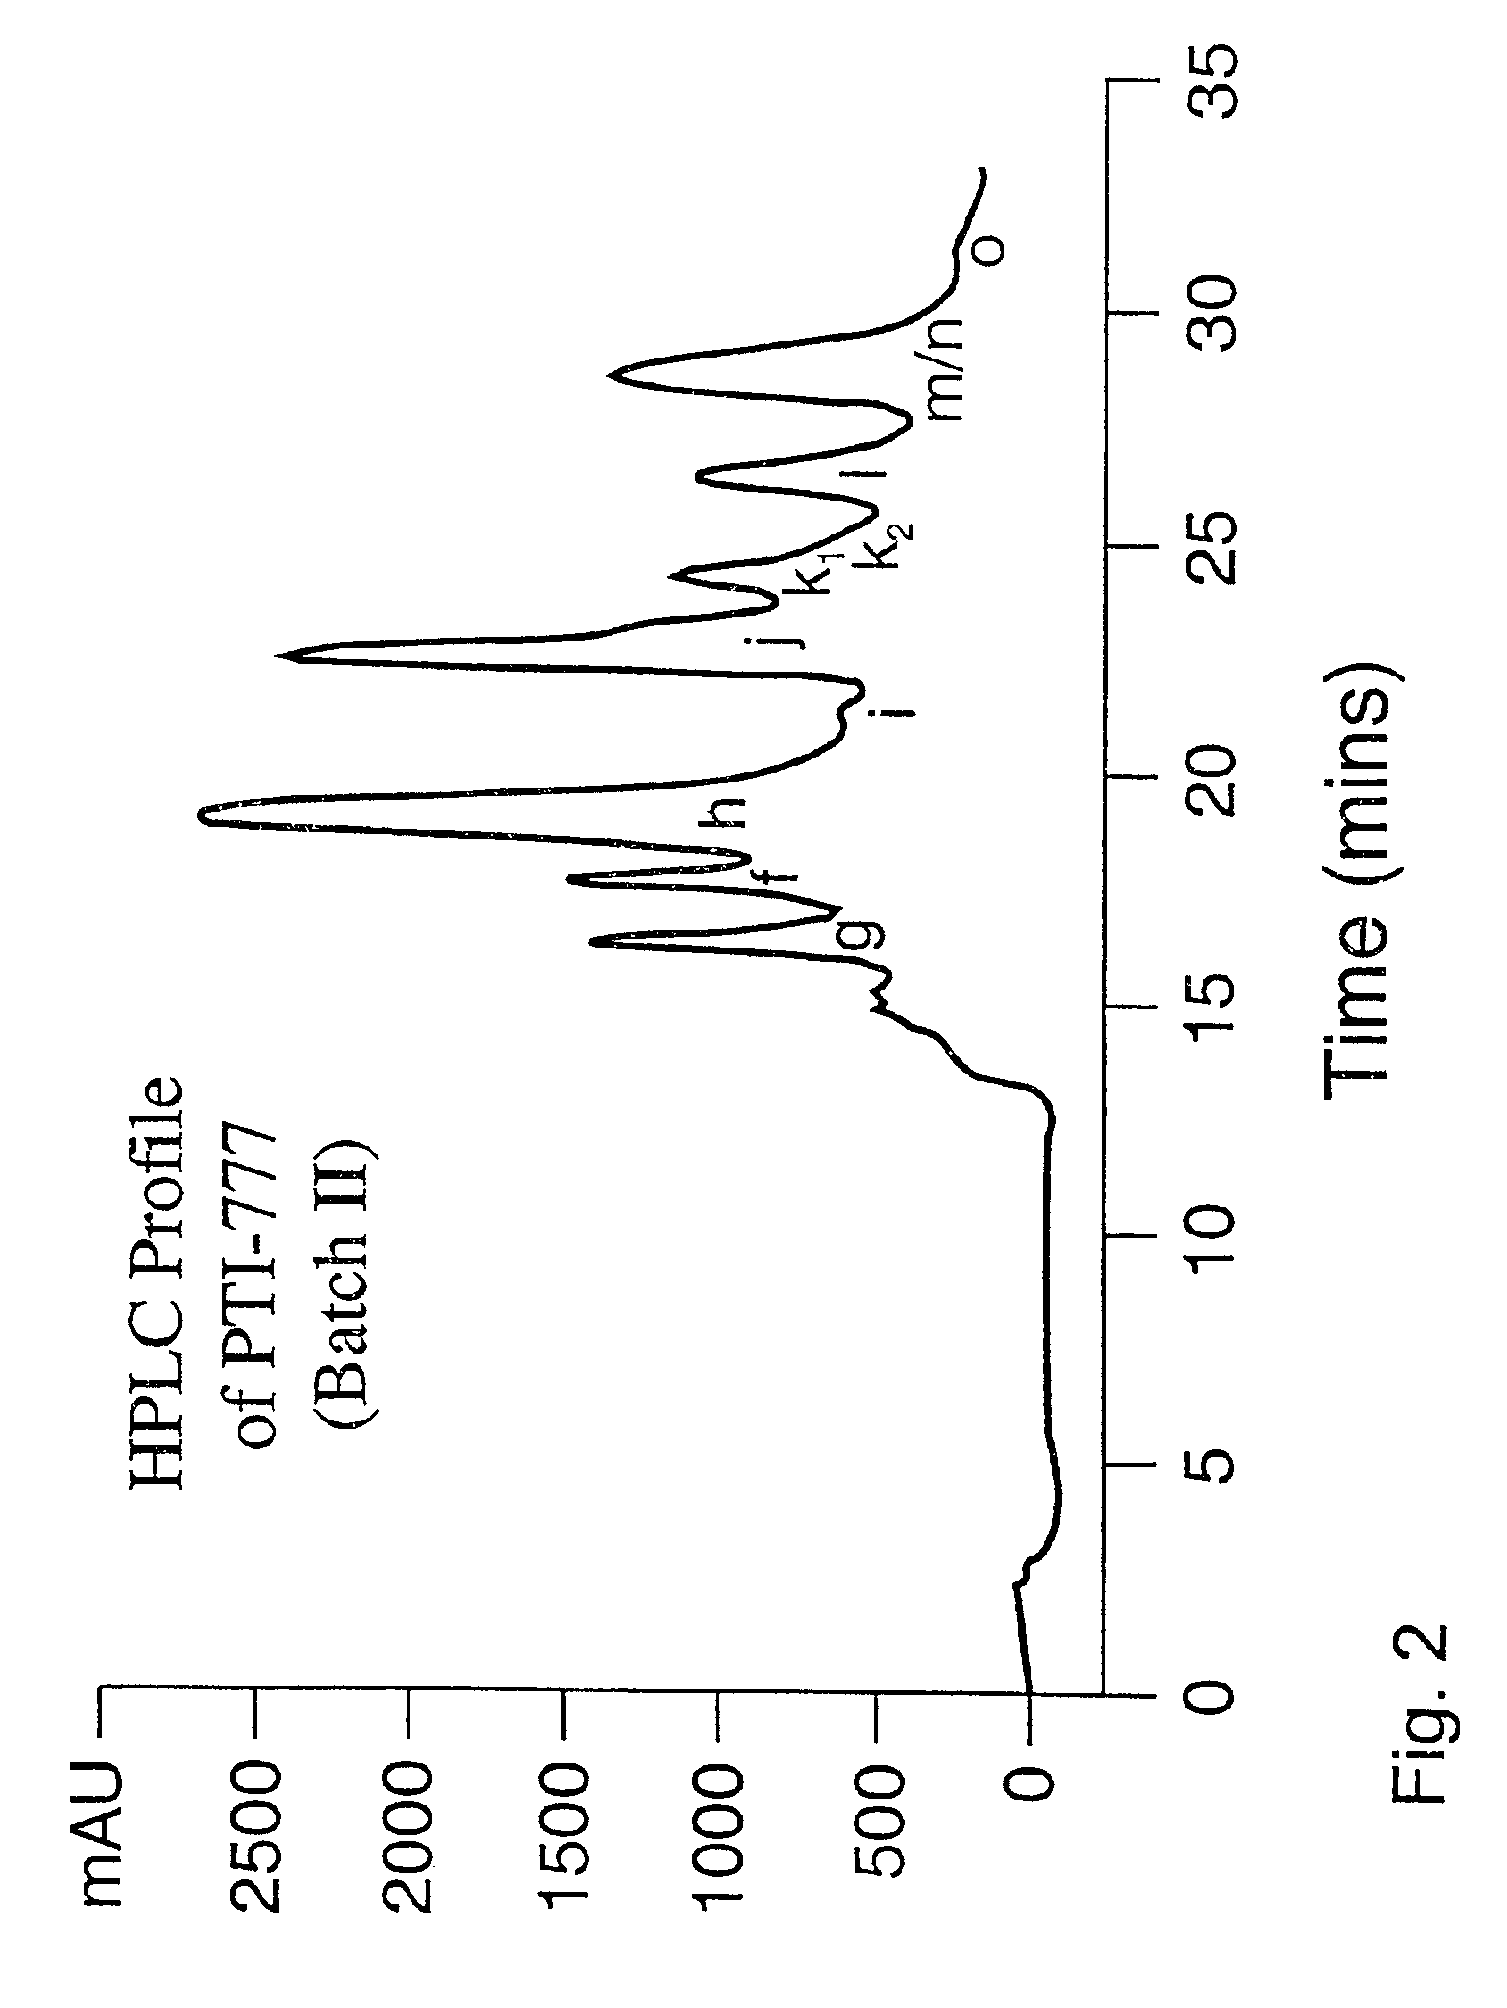 Methods of isolating amyloid-inhibiting compounds and use of compounds isolated from Uncaria tomentosa and related plants